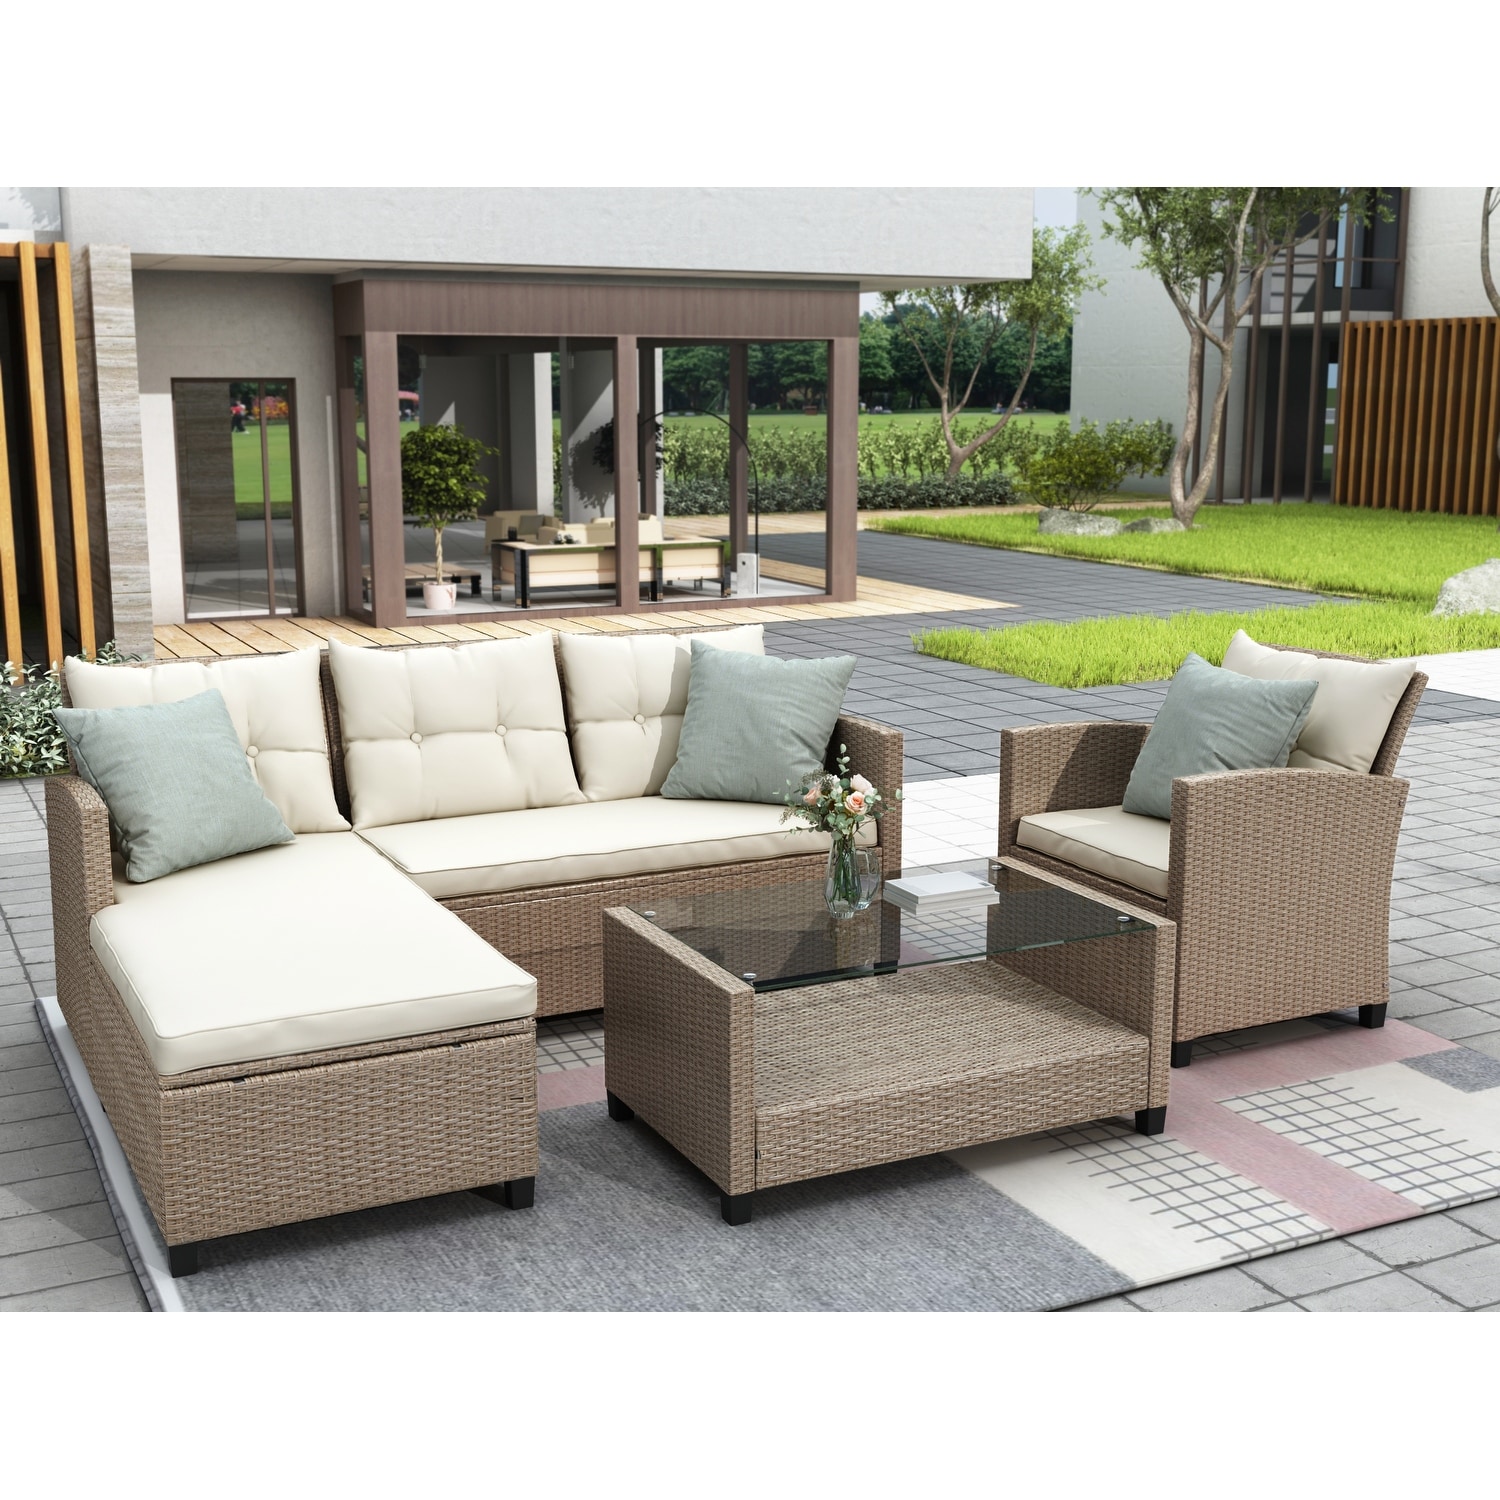 4-piece Rattan Sofa Set With Floating Glass Table